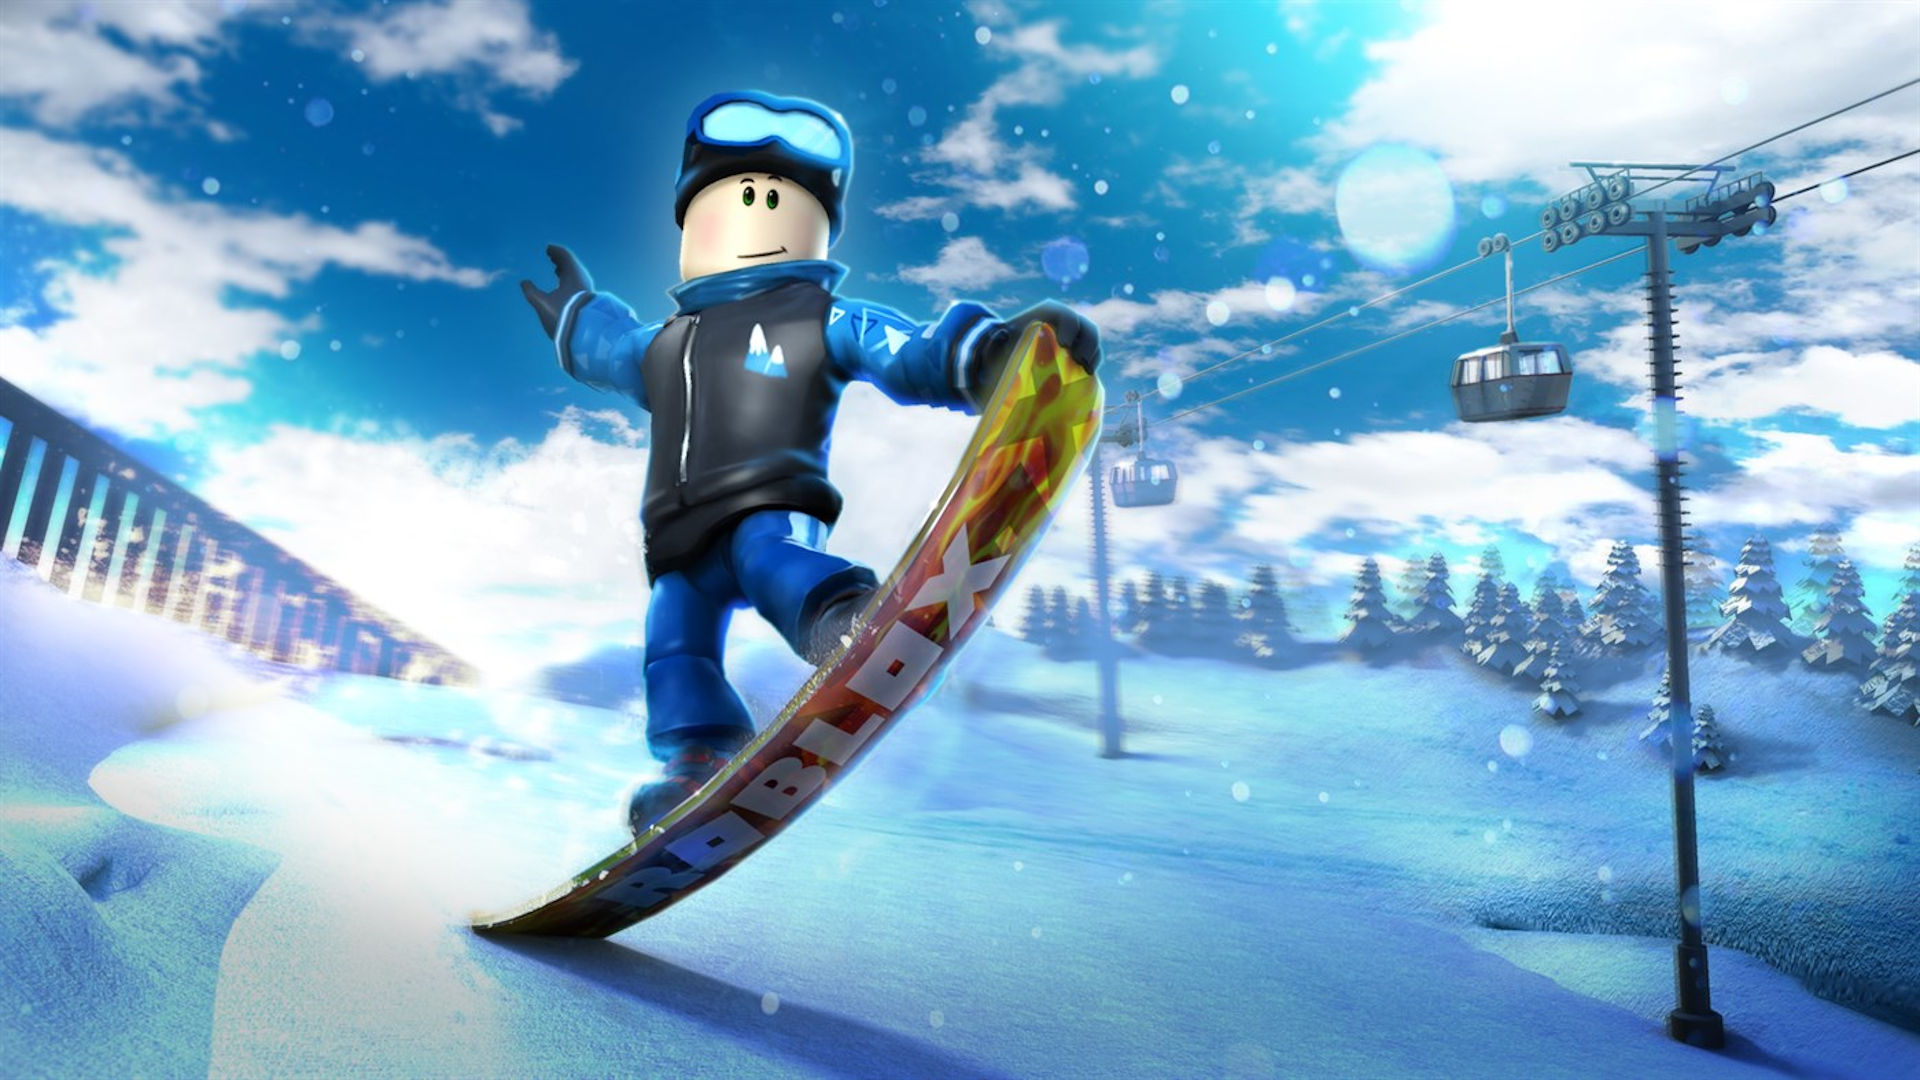 A Roblox character riding a snowboard down a snowy slope.